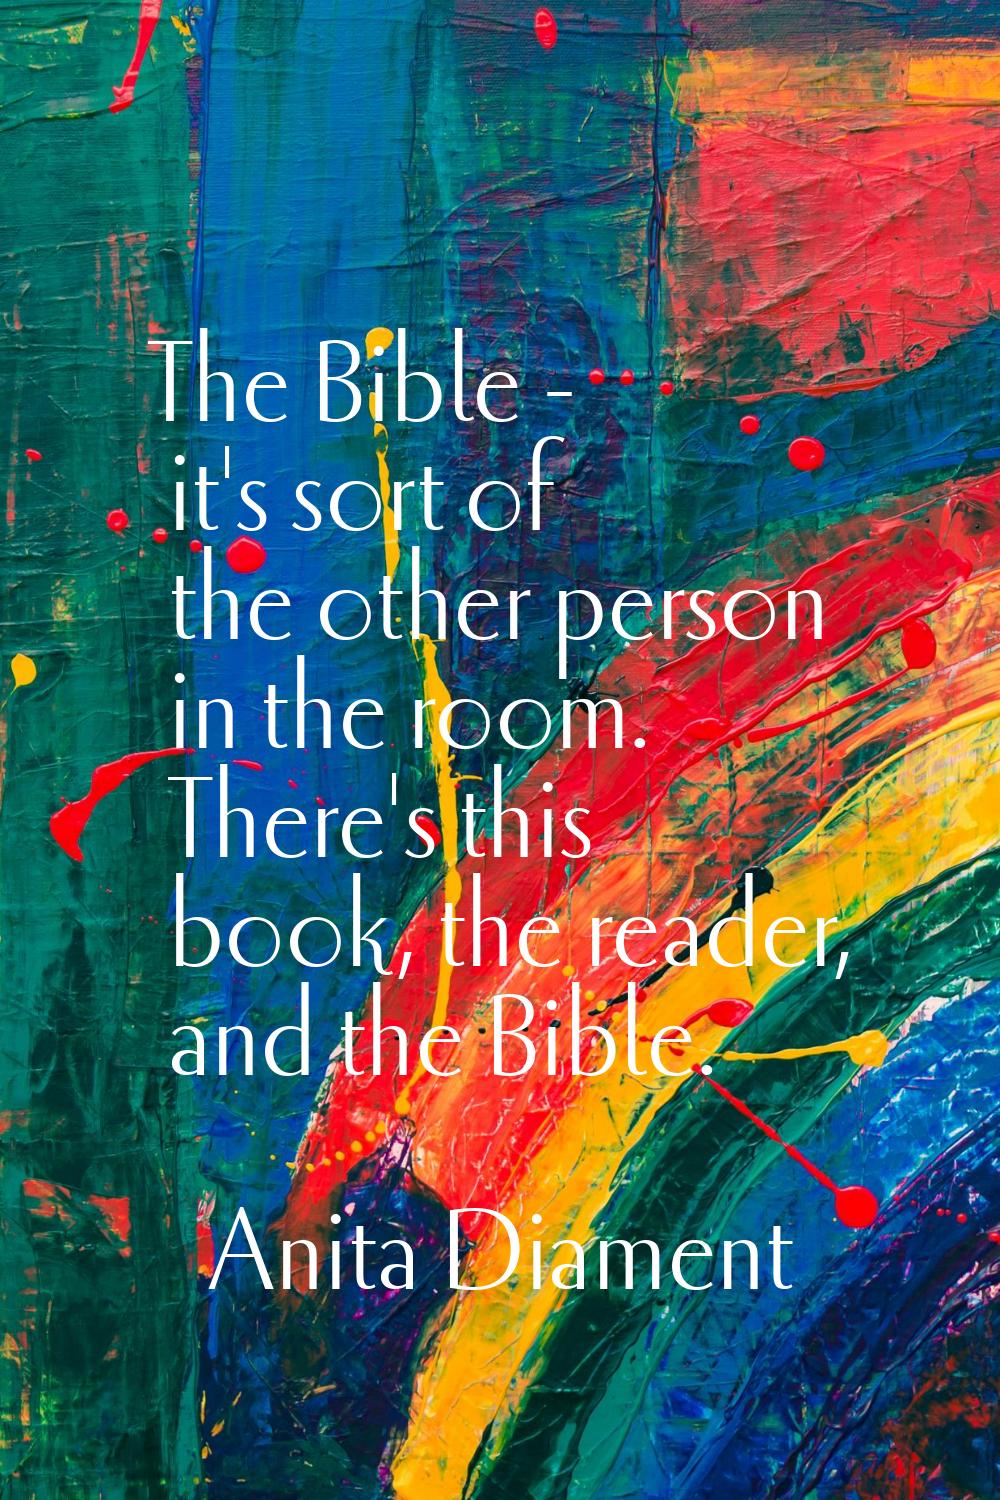 The Bible - it's sort of the other person in the room. There's this book, the reader, and the Bible